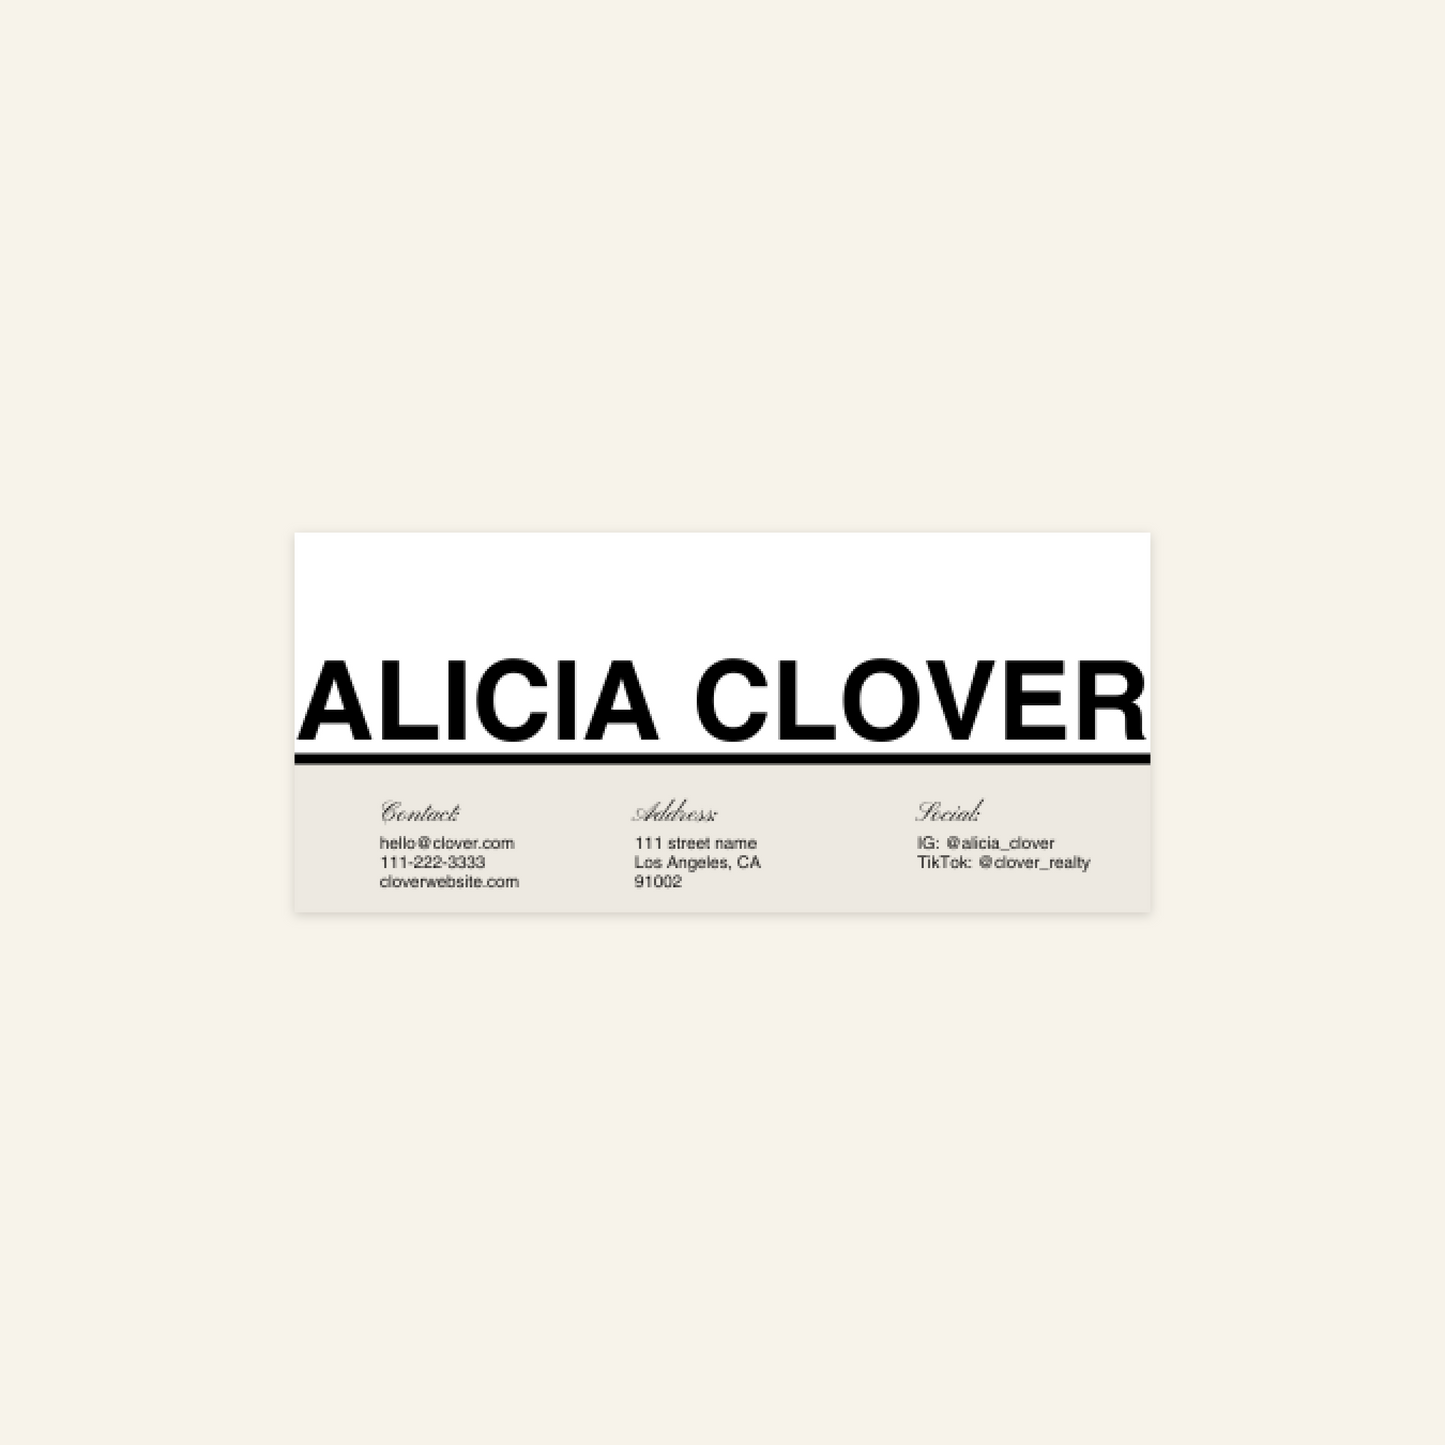 Clover - Email Signature Template